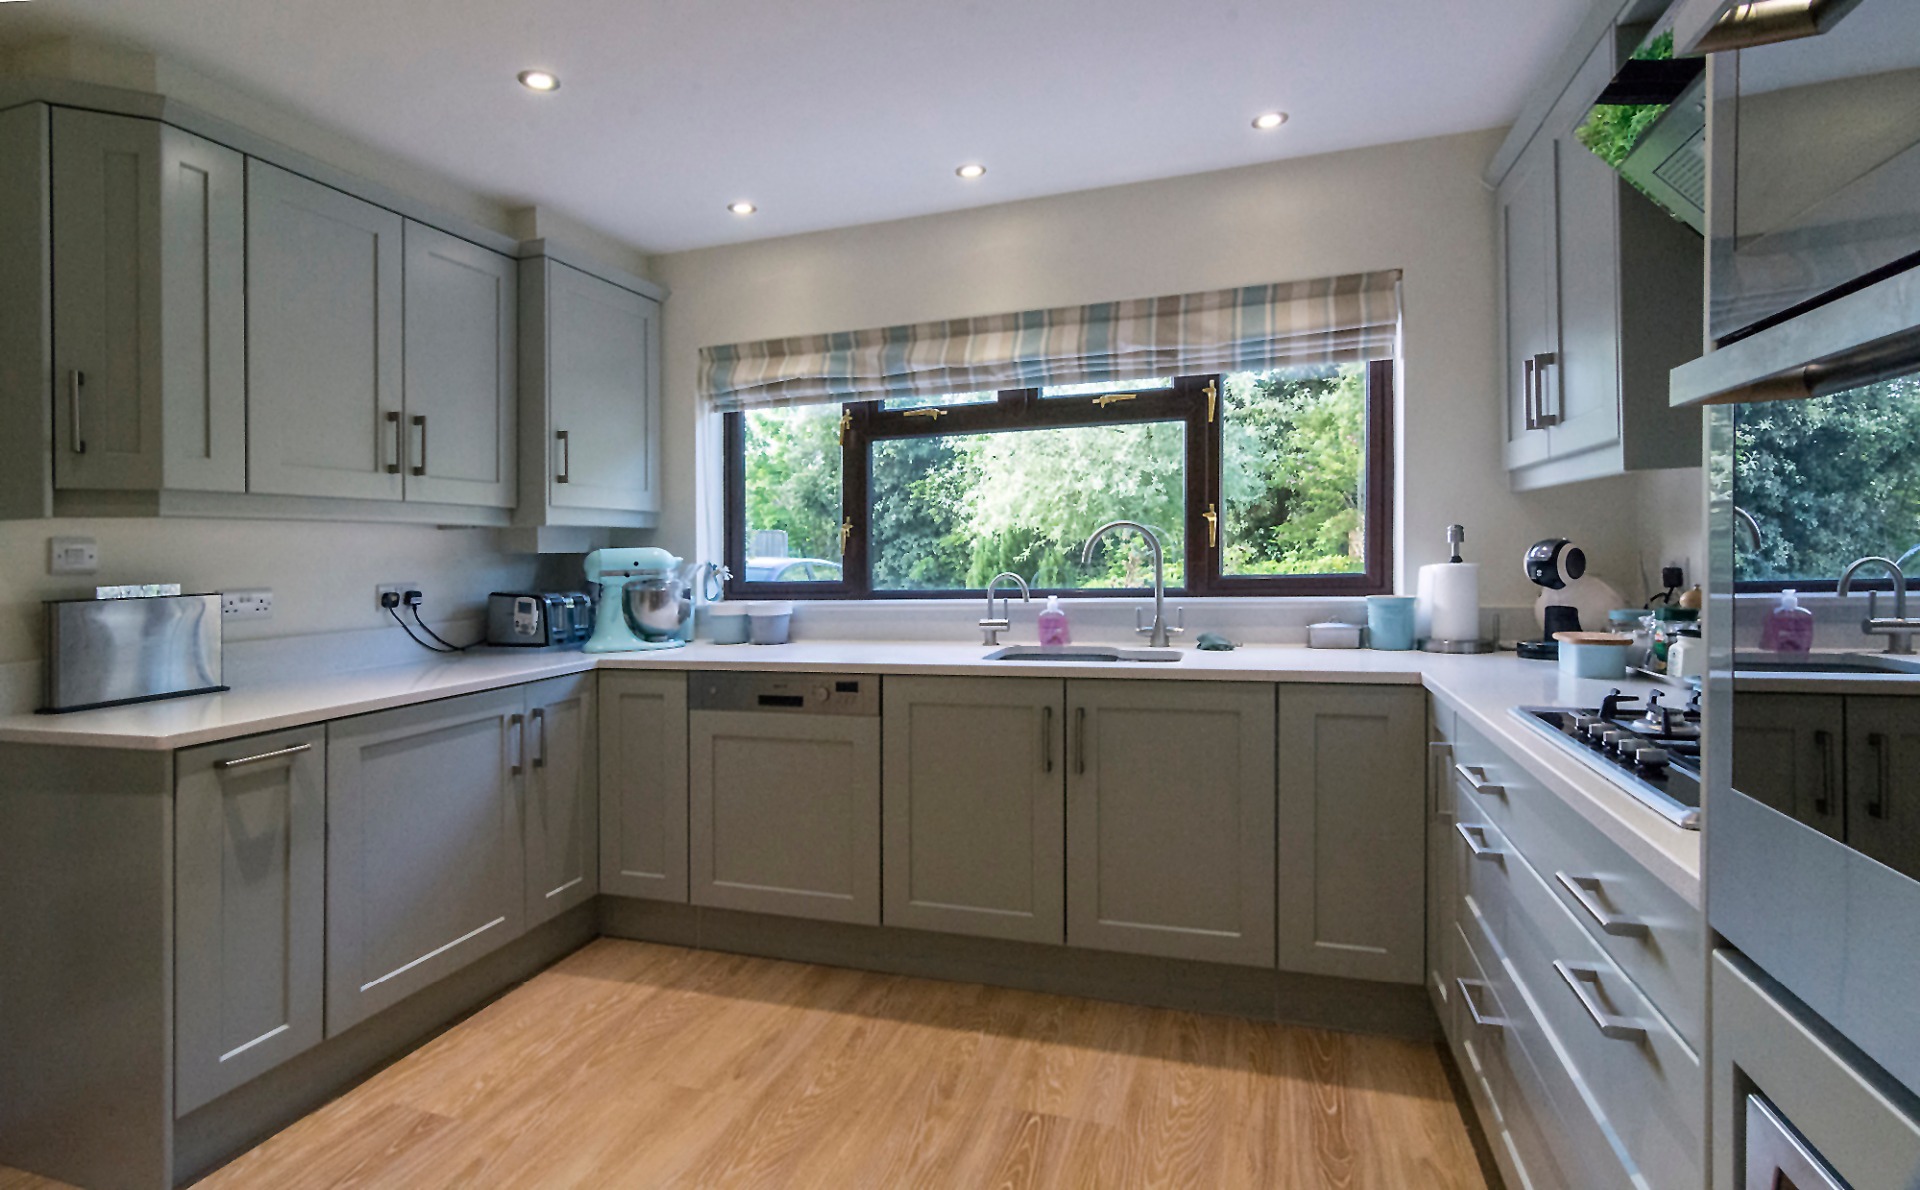 Built-in fitted kitchen